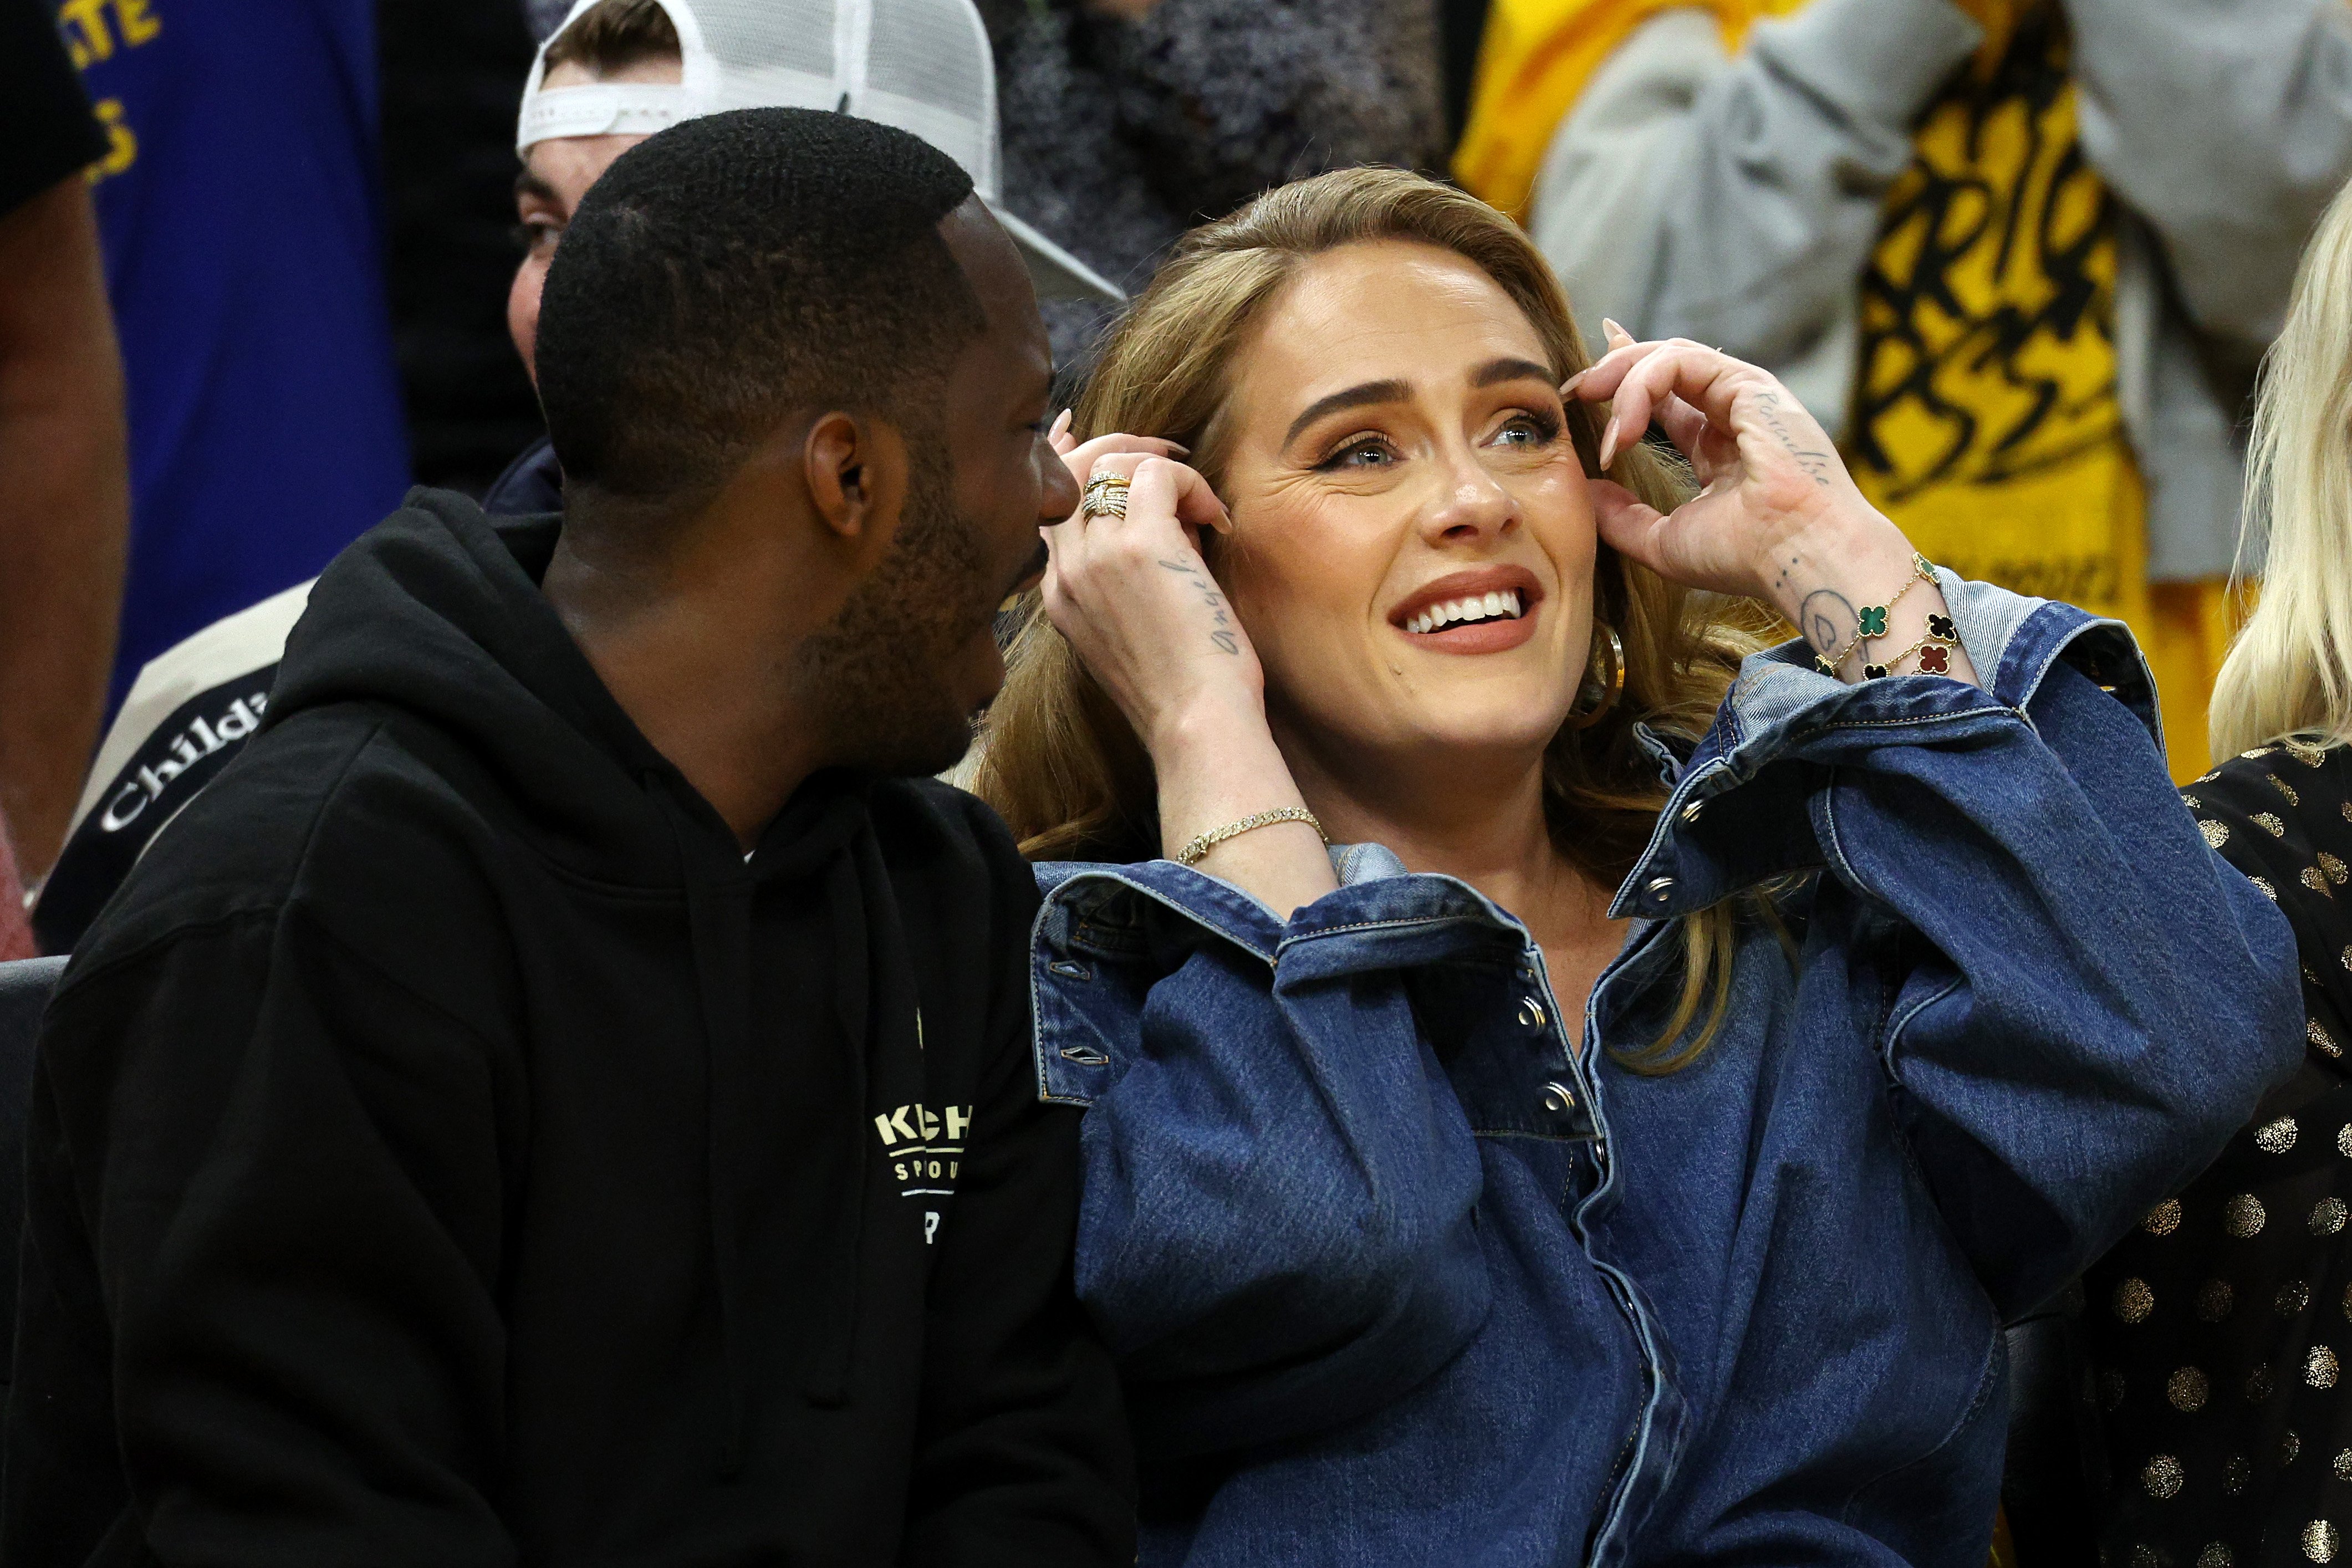 Agent Rich Paul and Adele attend Game Two of the 2022 NBA Playoffs Western Conference Finals between the Golden State Warriors and the Dallas Mavericks at Chase Center on May 20, 2022 in San Francisco, California. | Source: Getty Images